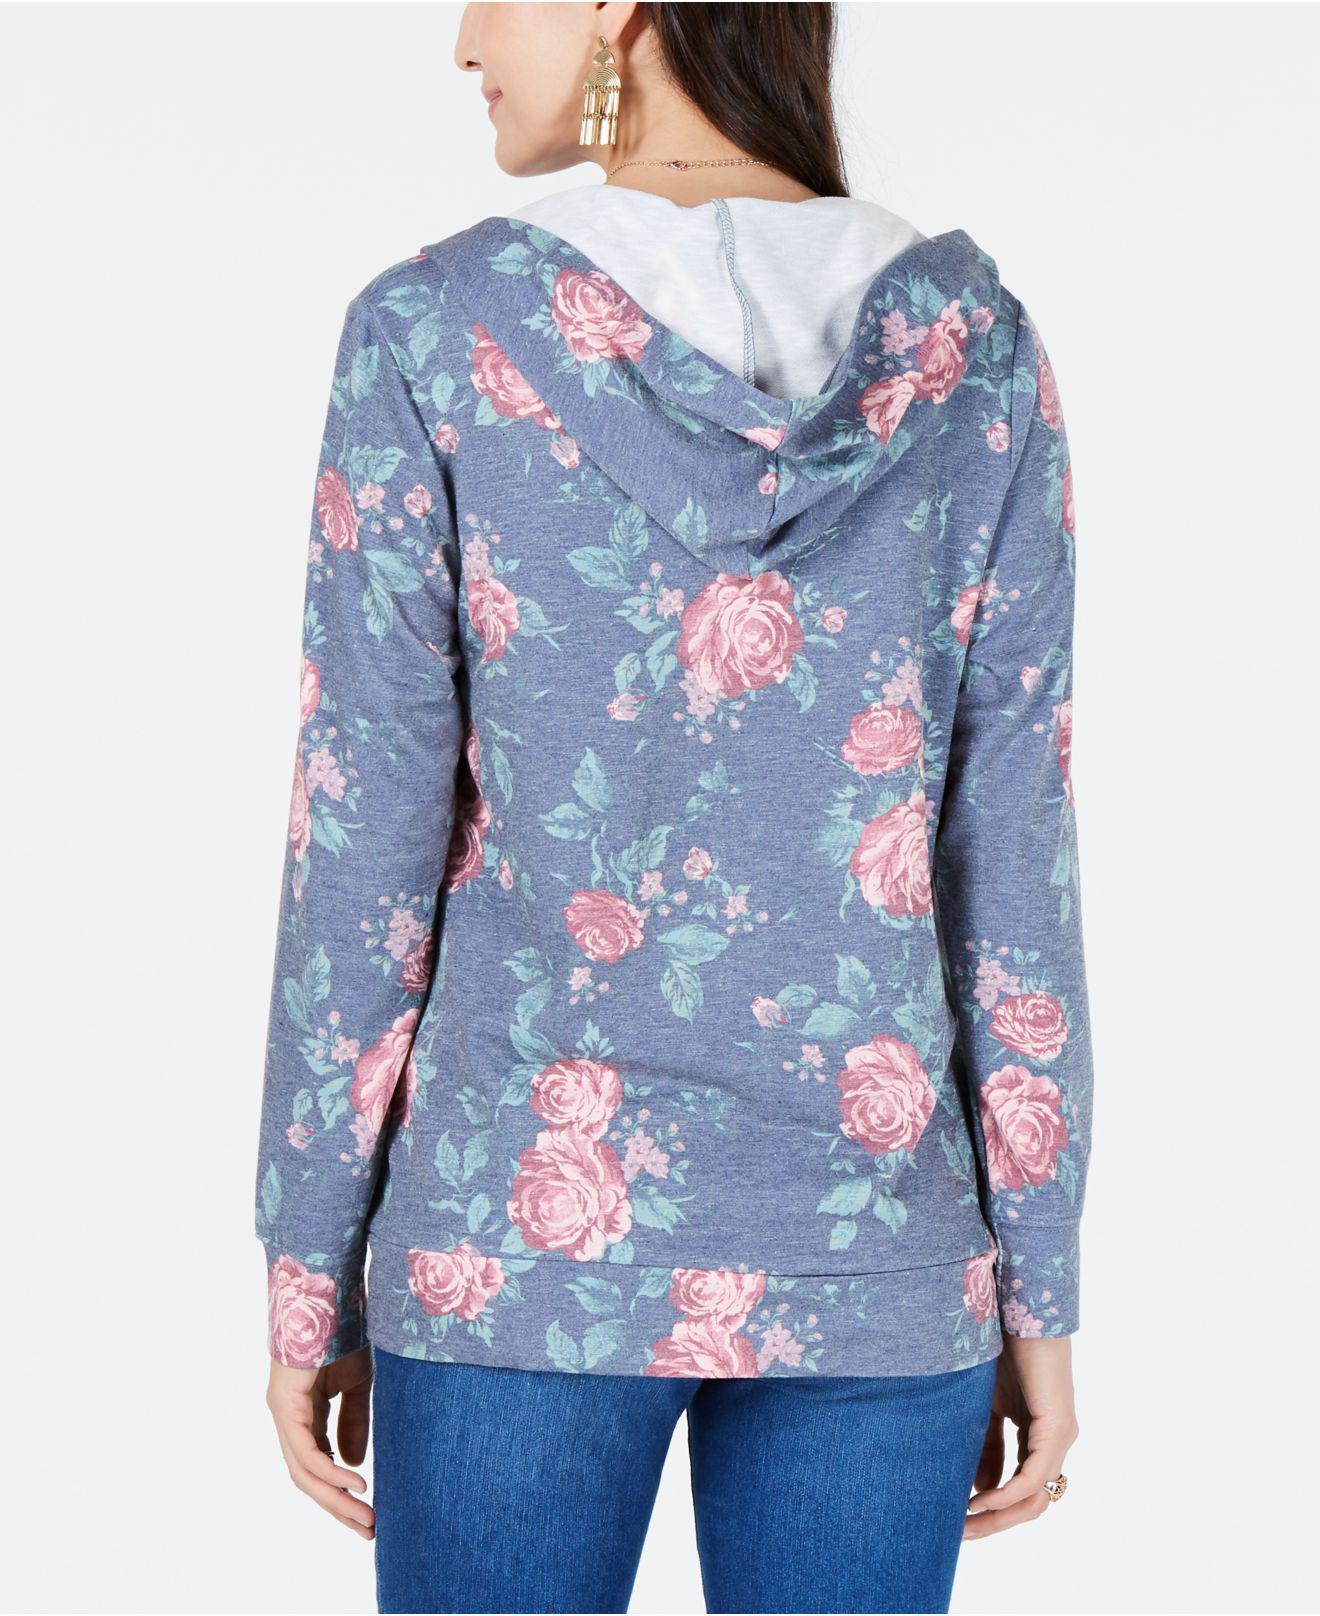 Style Co Synthetic Floral  print Zip  up  Hoodie  Top 